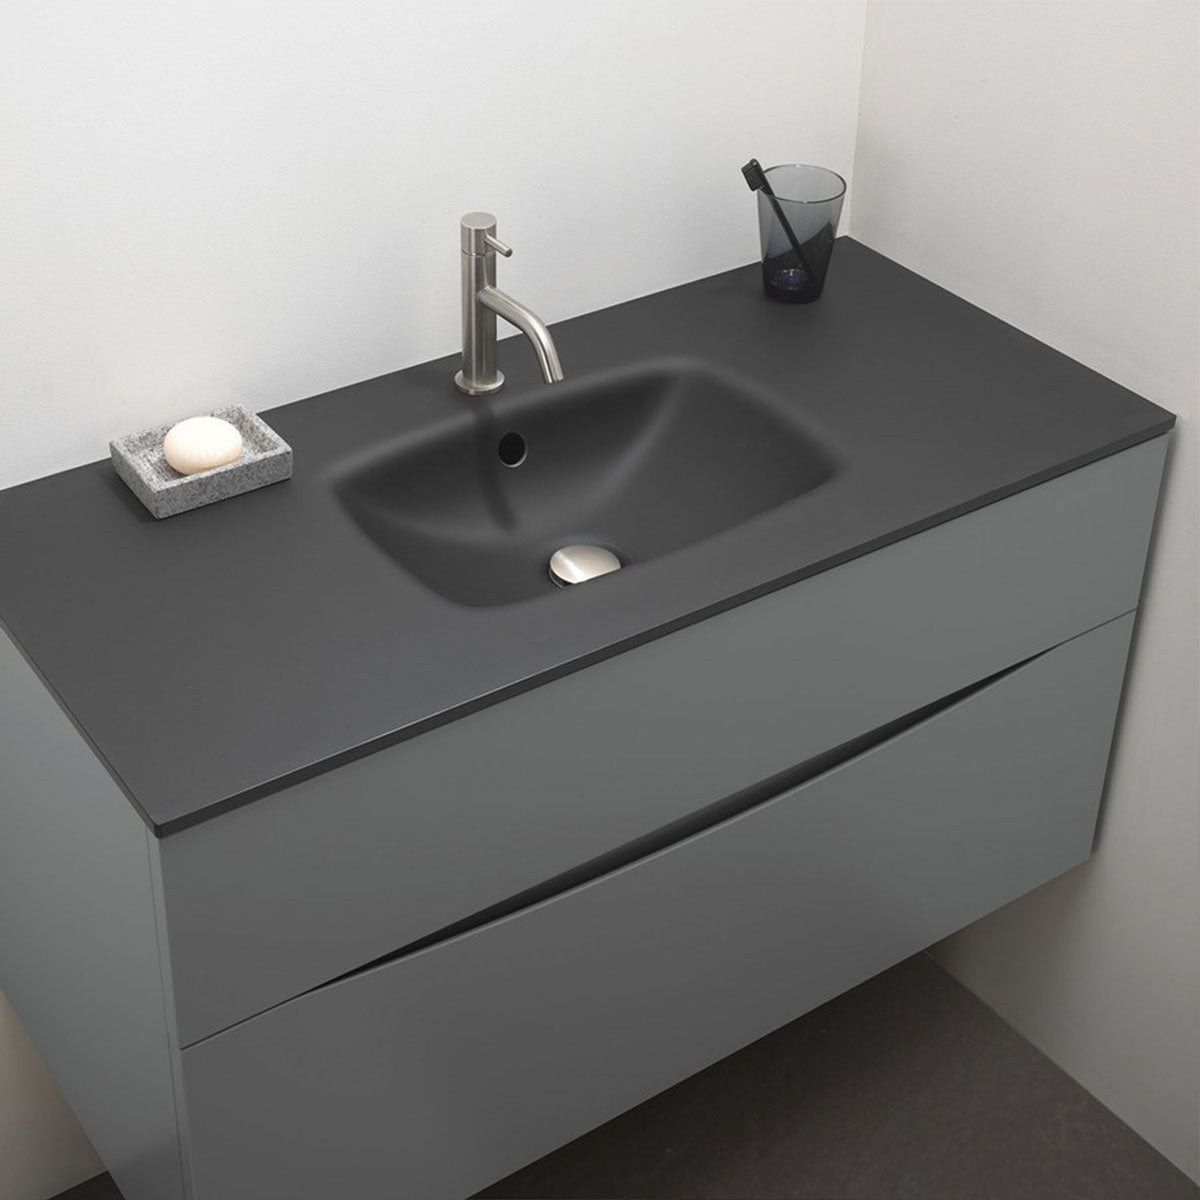 Glide II 1000 Unit With Midnight Black Glass Basin Feature